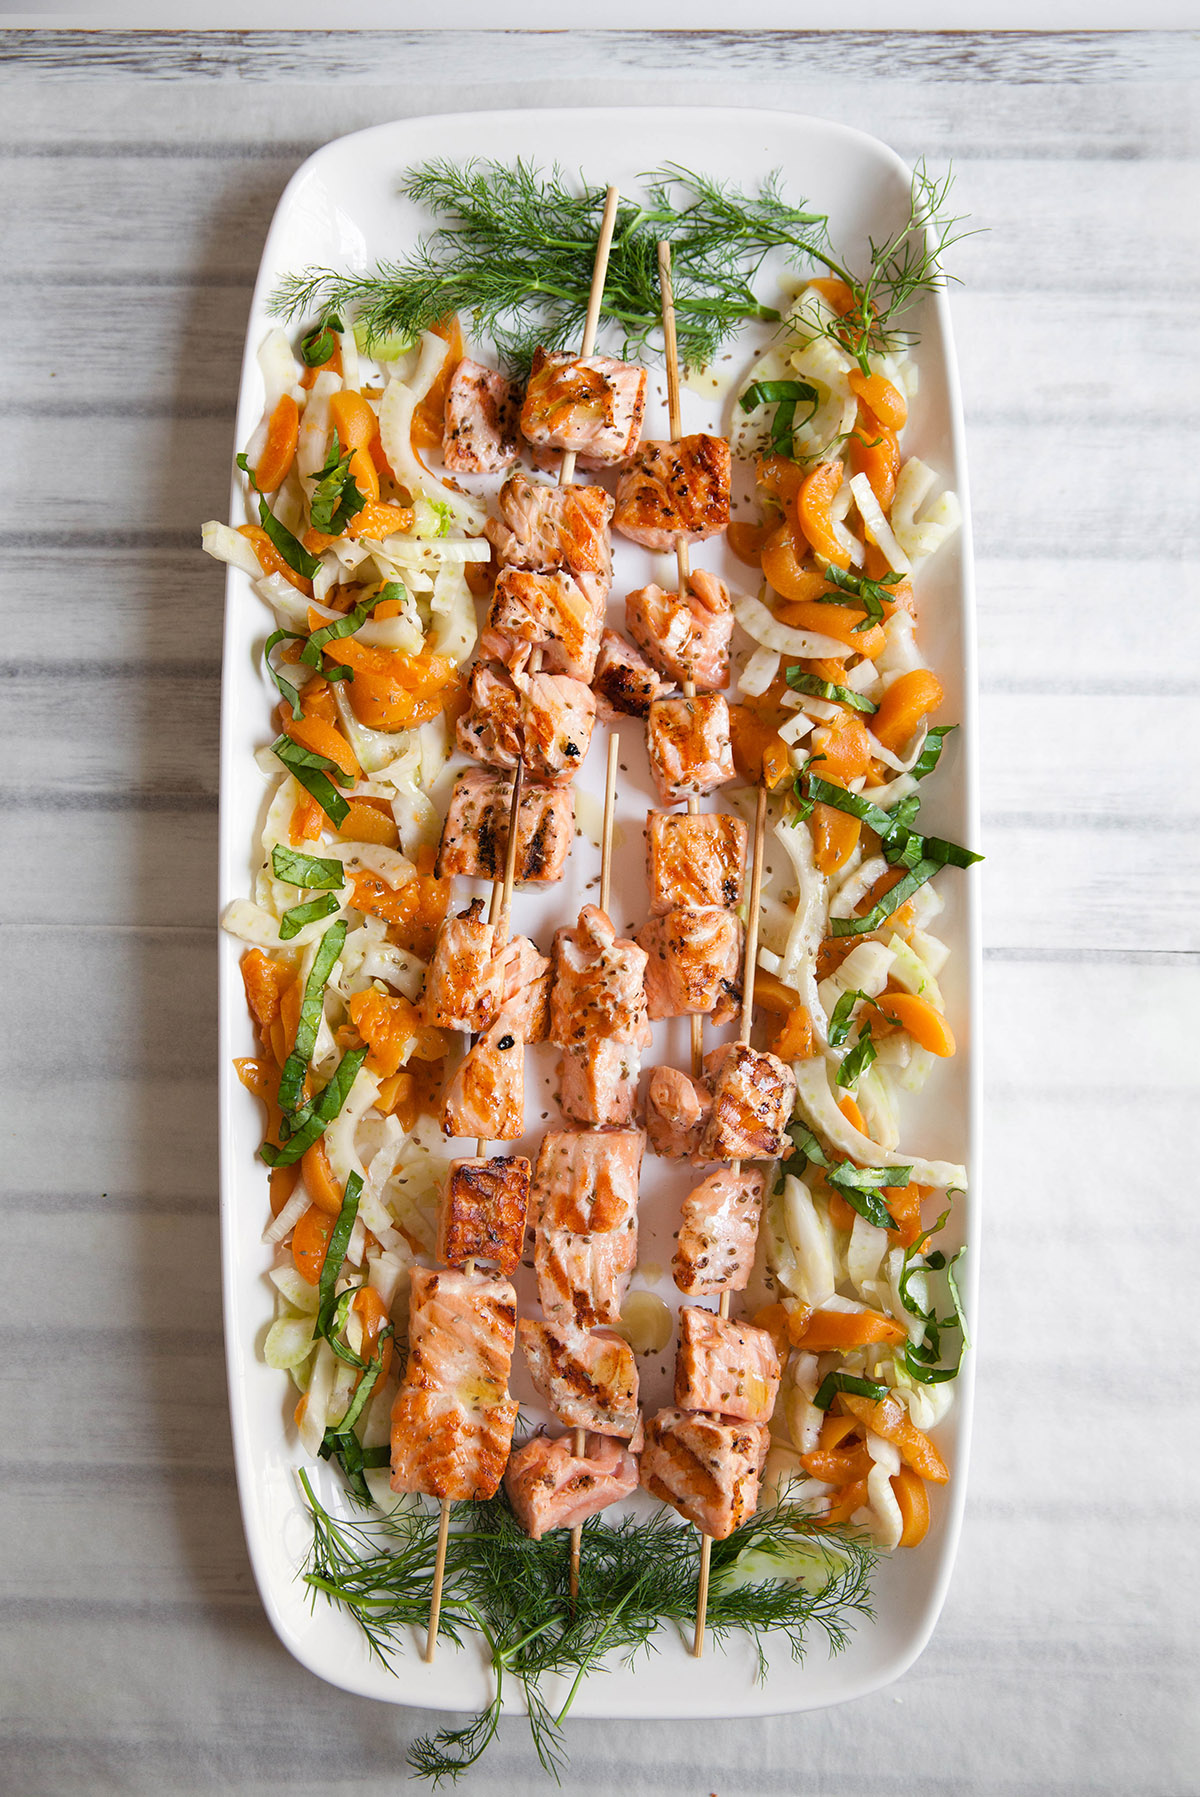 Grilled Salmon Skewers with Apricot and Fennel Salad